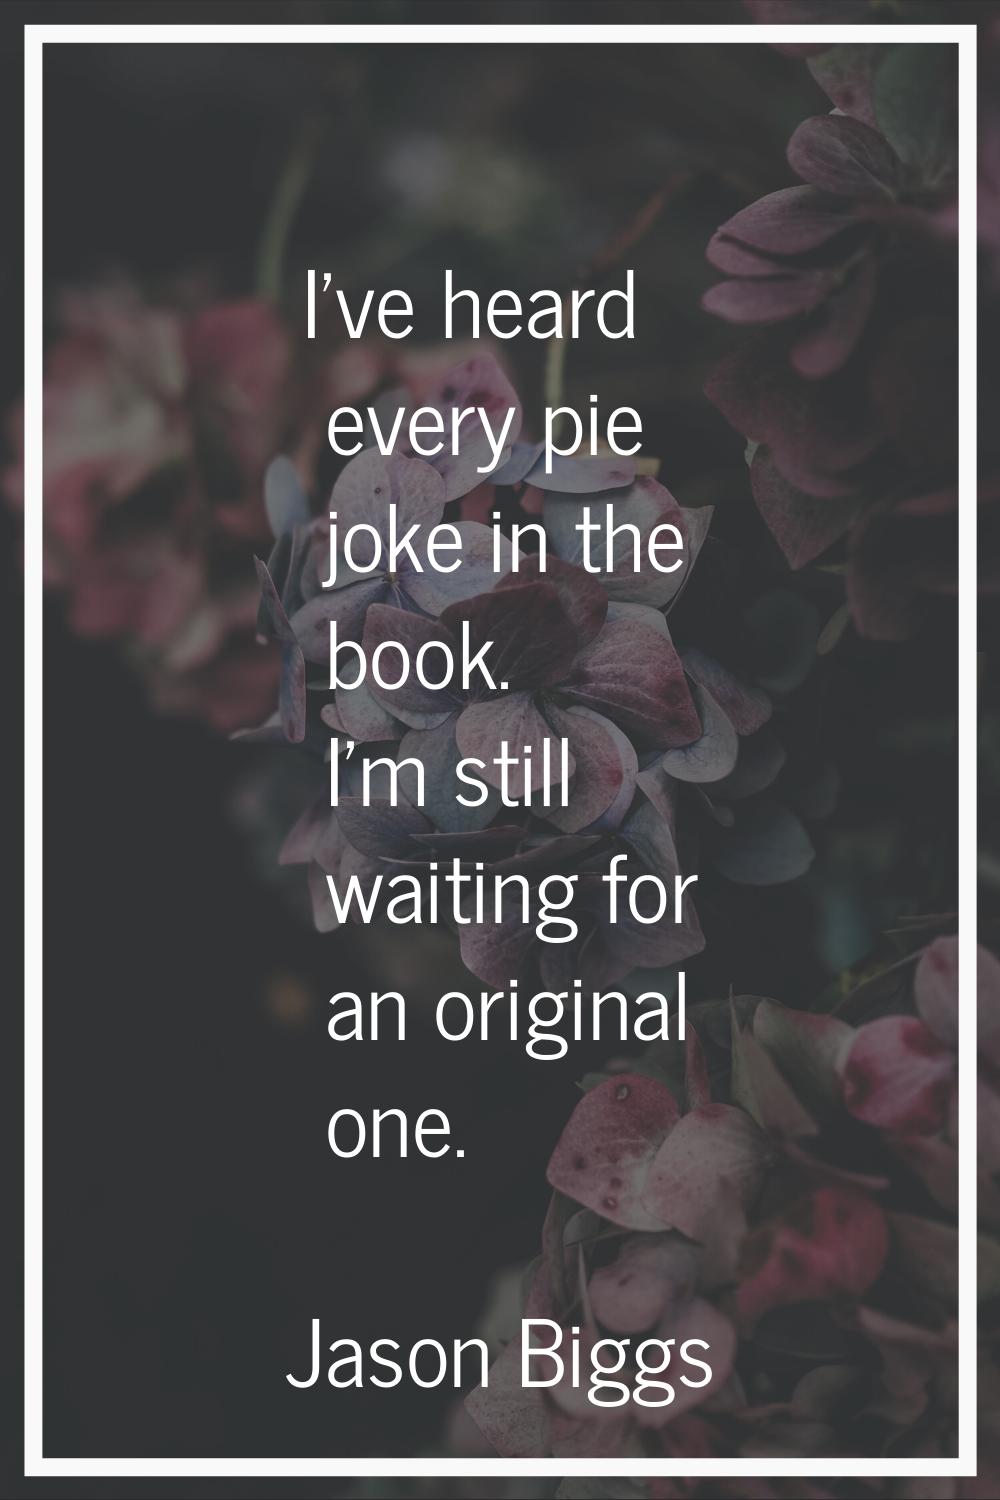 I've heard every pie joke in the book. I'm still waiting for an original one.